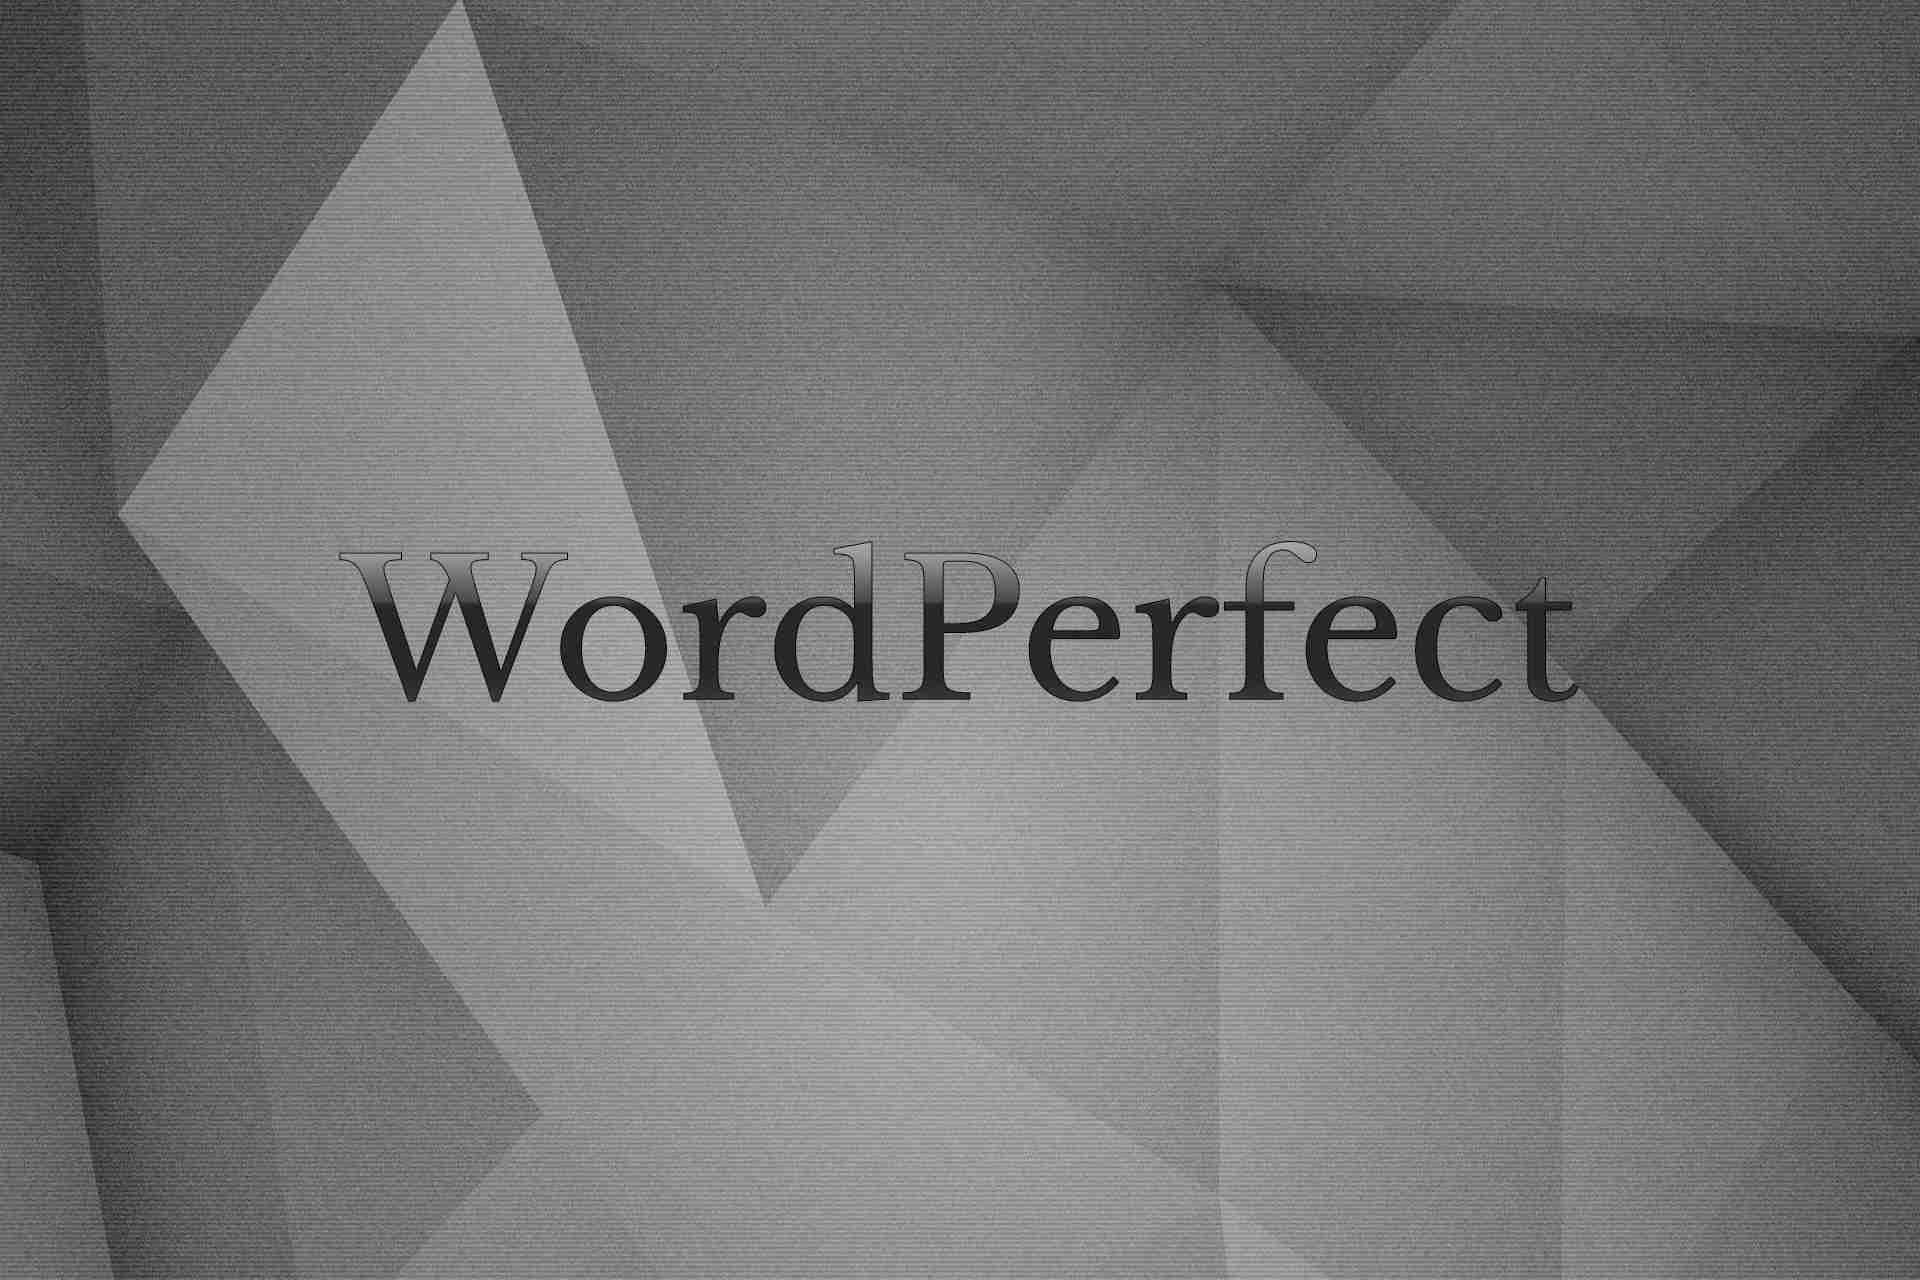 Get Corel WordPerfect at a special price this Black Friday